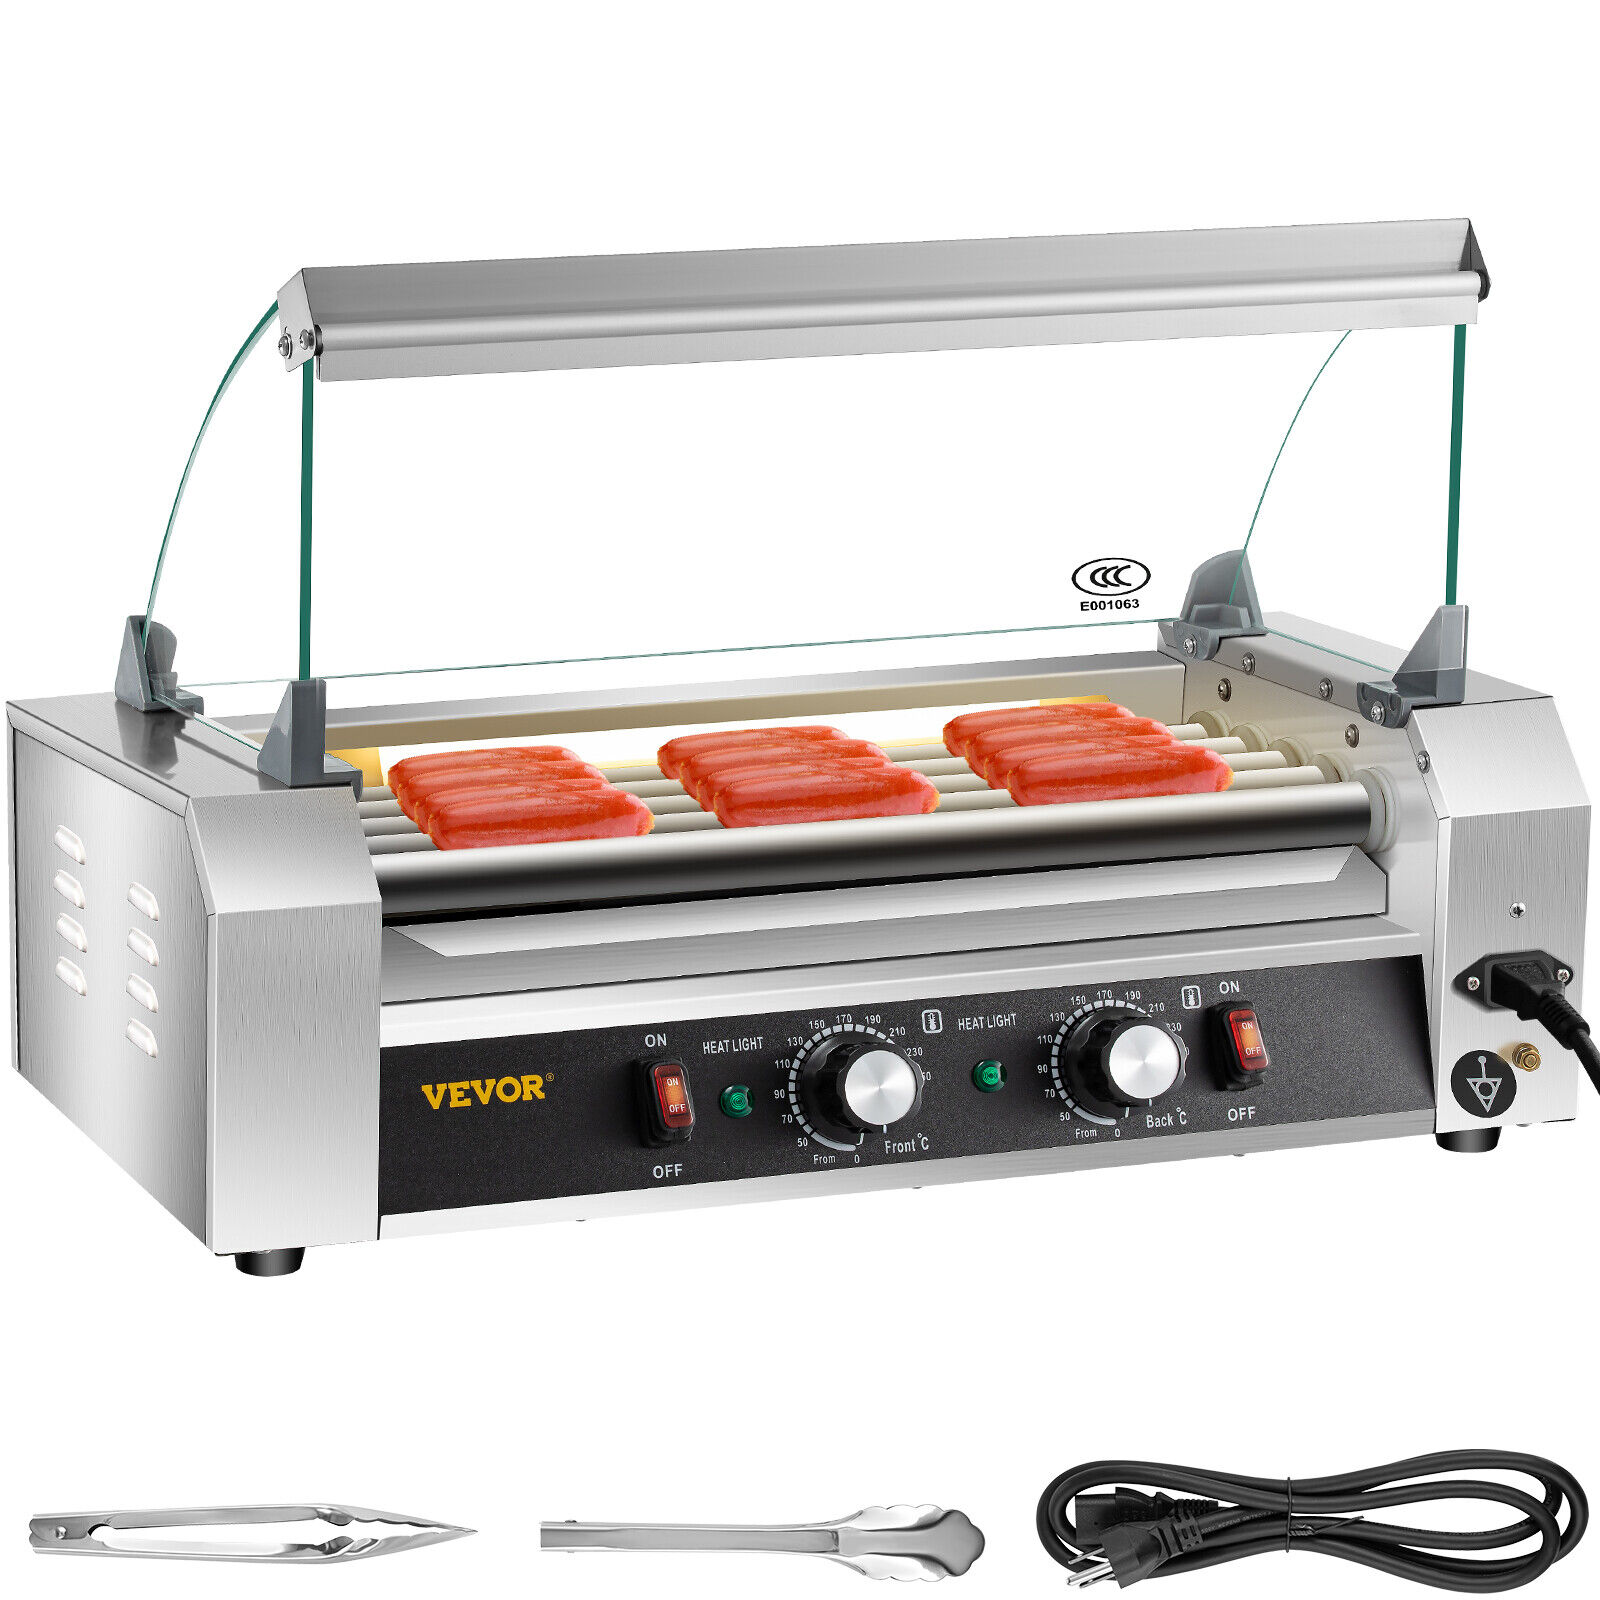 Vevor Electric 12 Hot Dog 5 Roller Grill Cooker Machine W/ Cover 750w Stainless